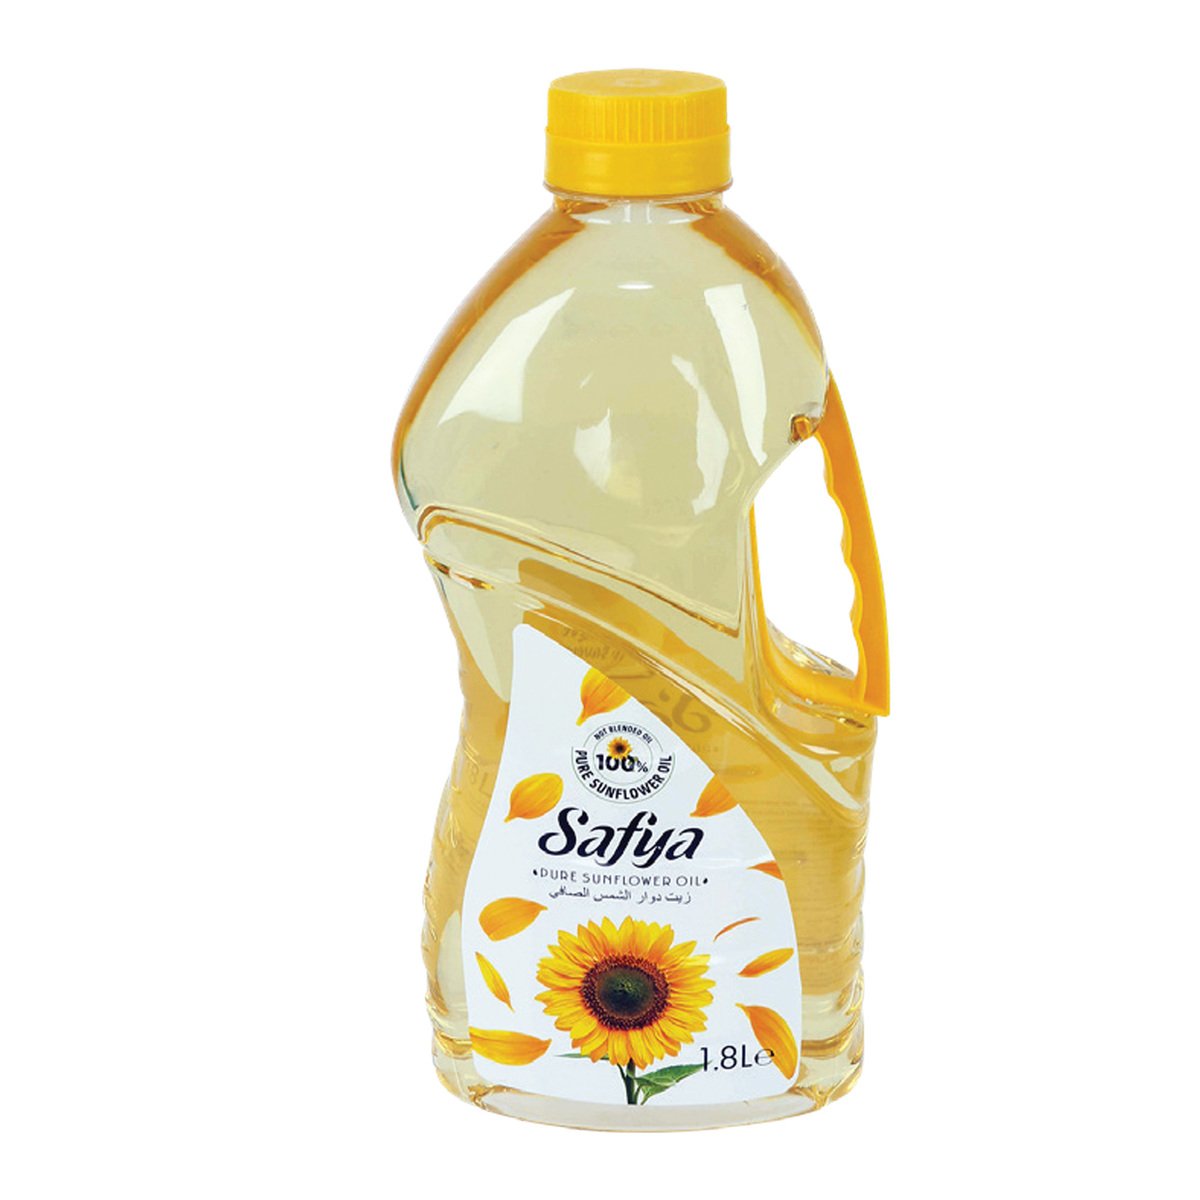 Safya Pure Sunflower Oil 1.8 Litres